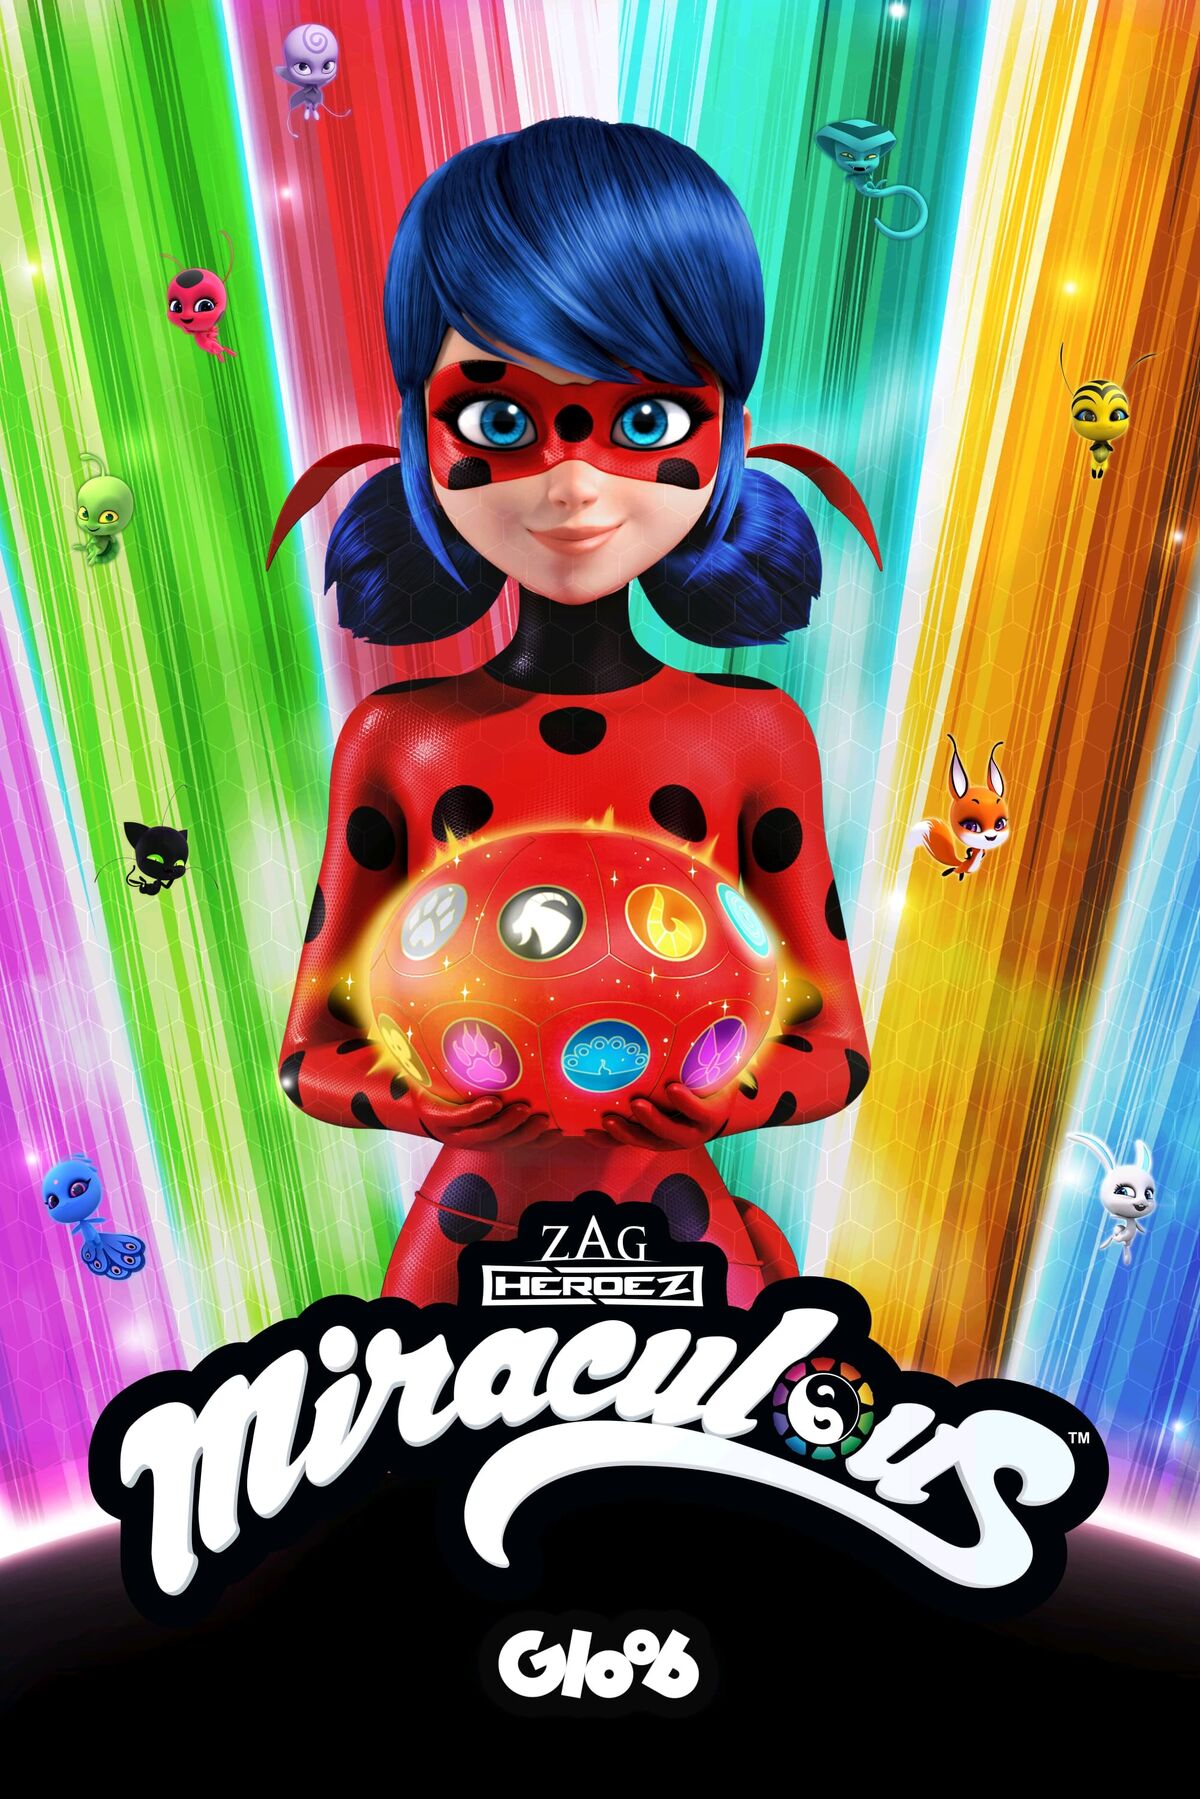 Miraculous Ladybug – The Musical Show to Launch in France and Brazil  Following Successful Latin America Launch in Argentina in July 2022 -  Licensing International